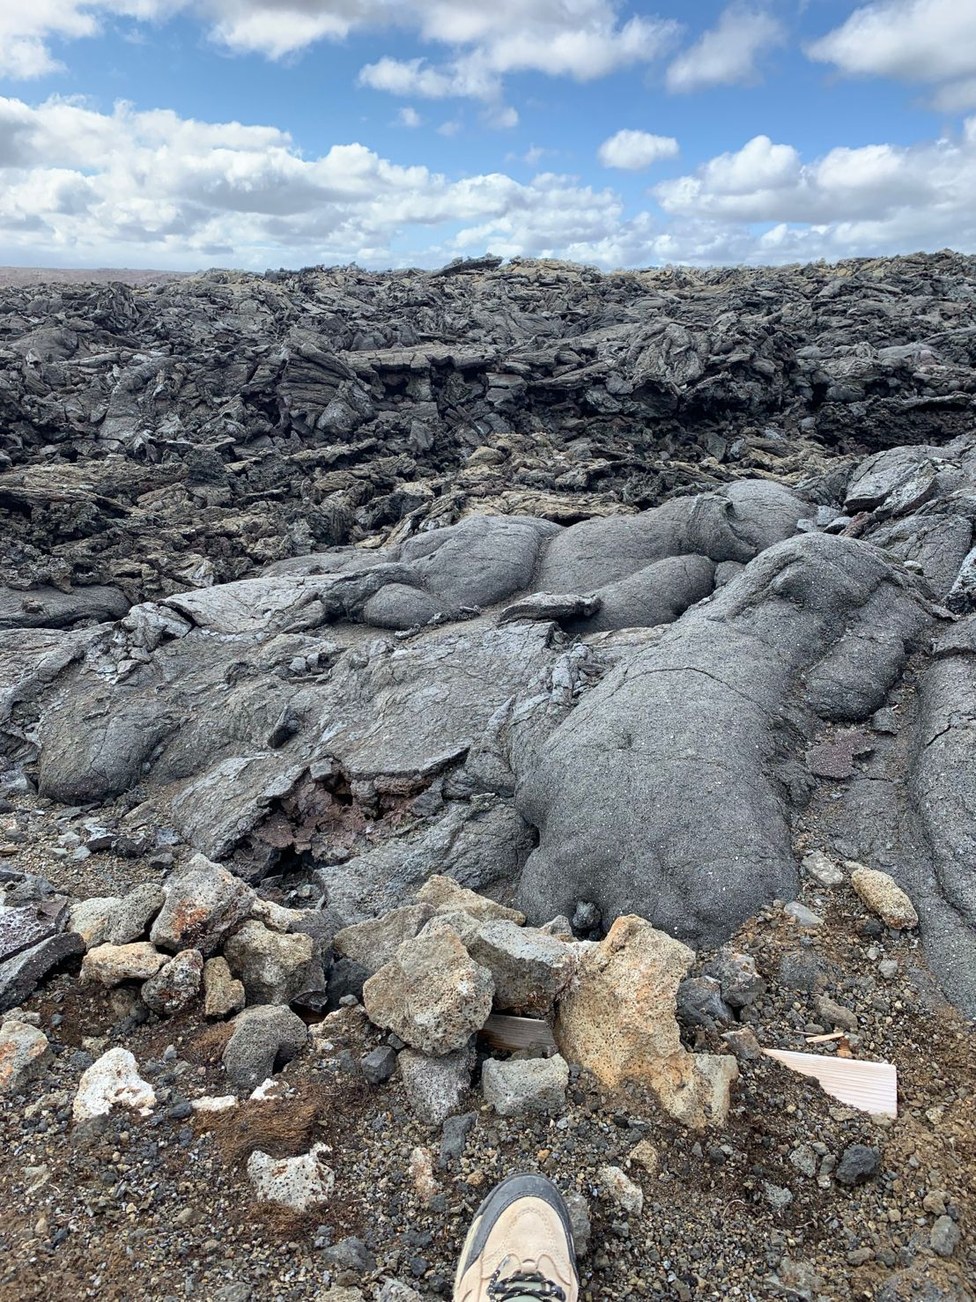 Solidified lava field on which we were walking to reach the lava caves